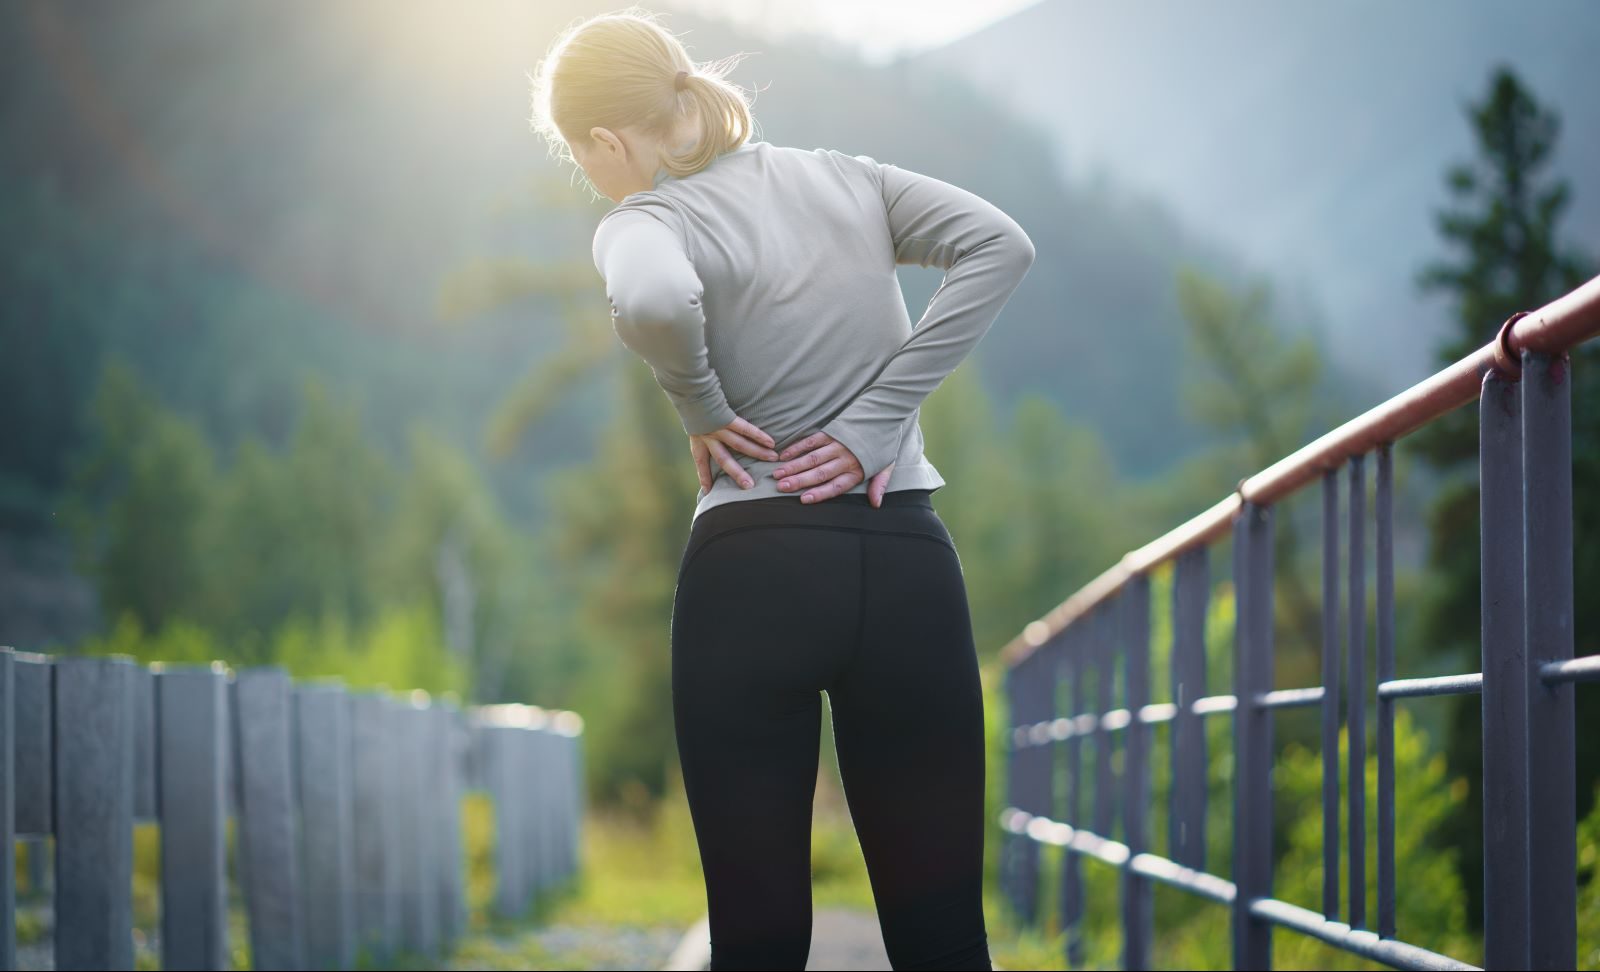 If you're one of the millions of Americans that suffer from chronic back pain, you may be wondering if surgery could be the answer.